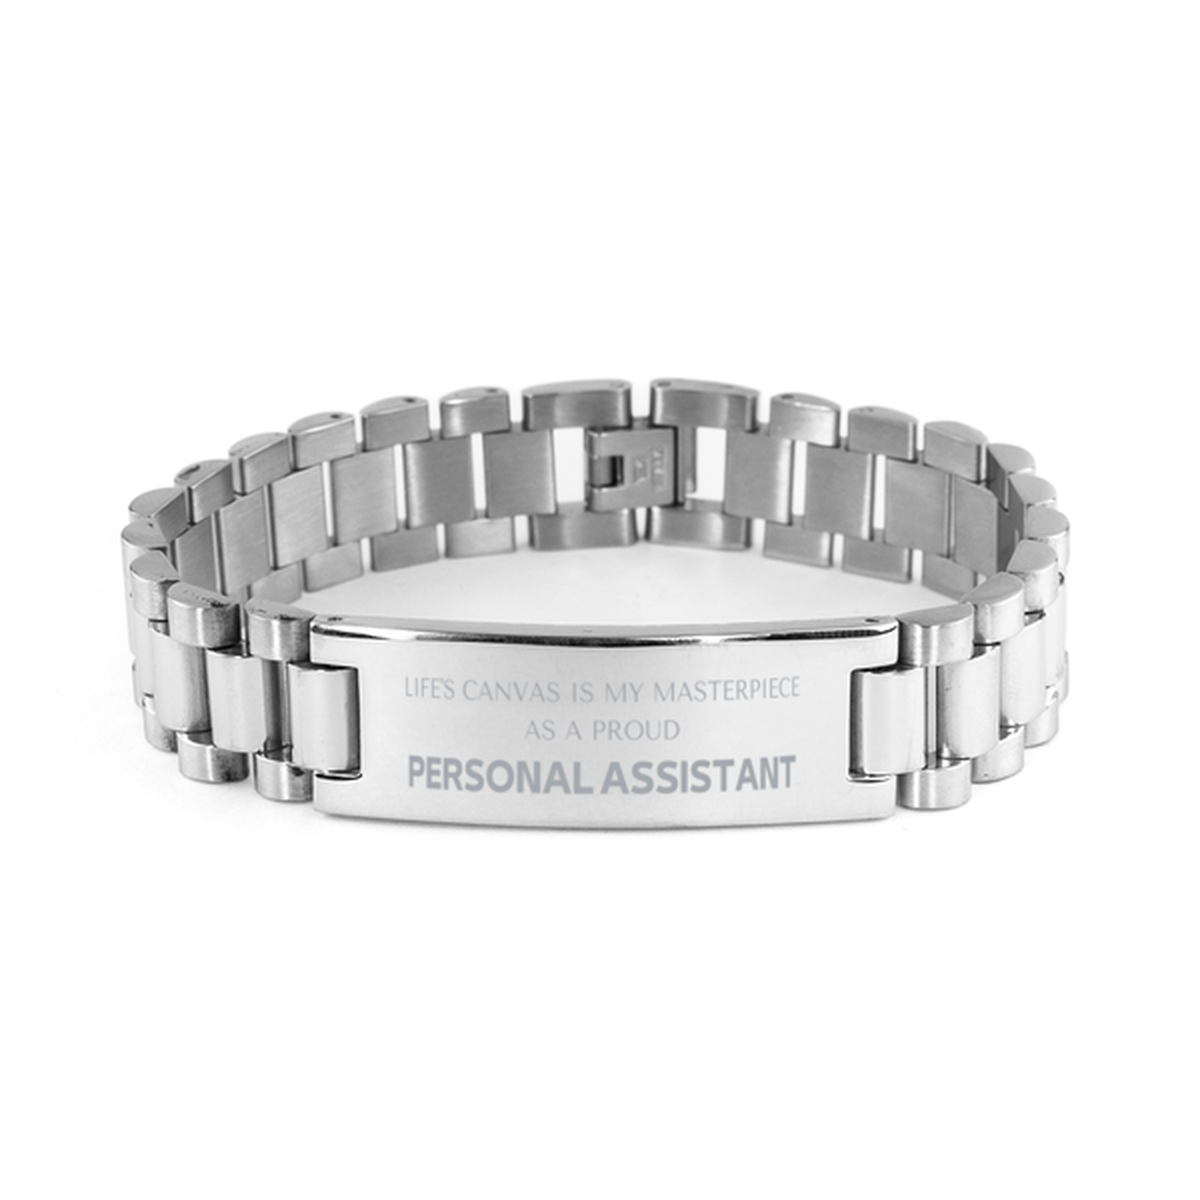 Proud Personal Assistant Gifts, Life's canvas is my masterpiece, Epic Birthday Christmas Unique Ladder Stainless Steel Bracelet For Personal Assistant, Coworkers, Men, Women, Friends